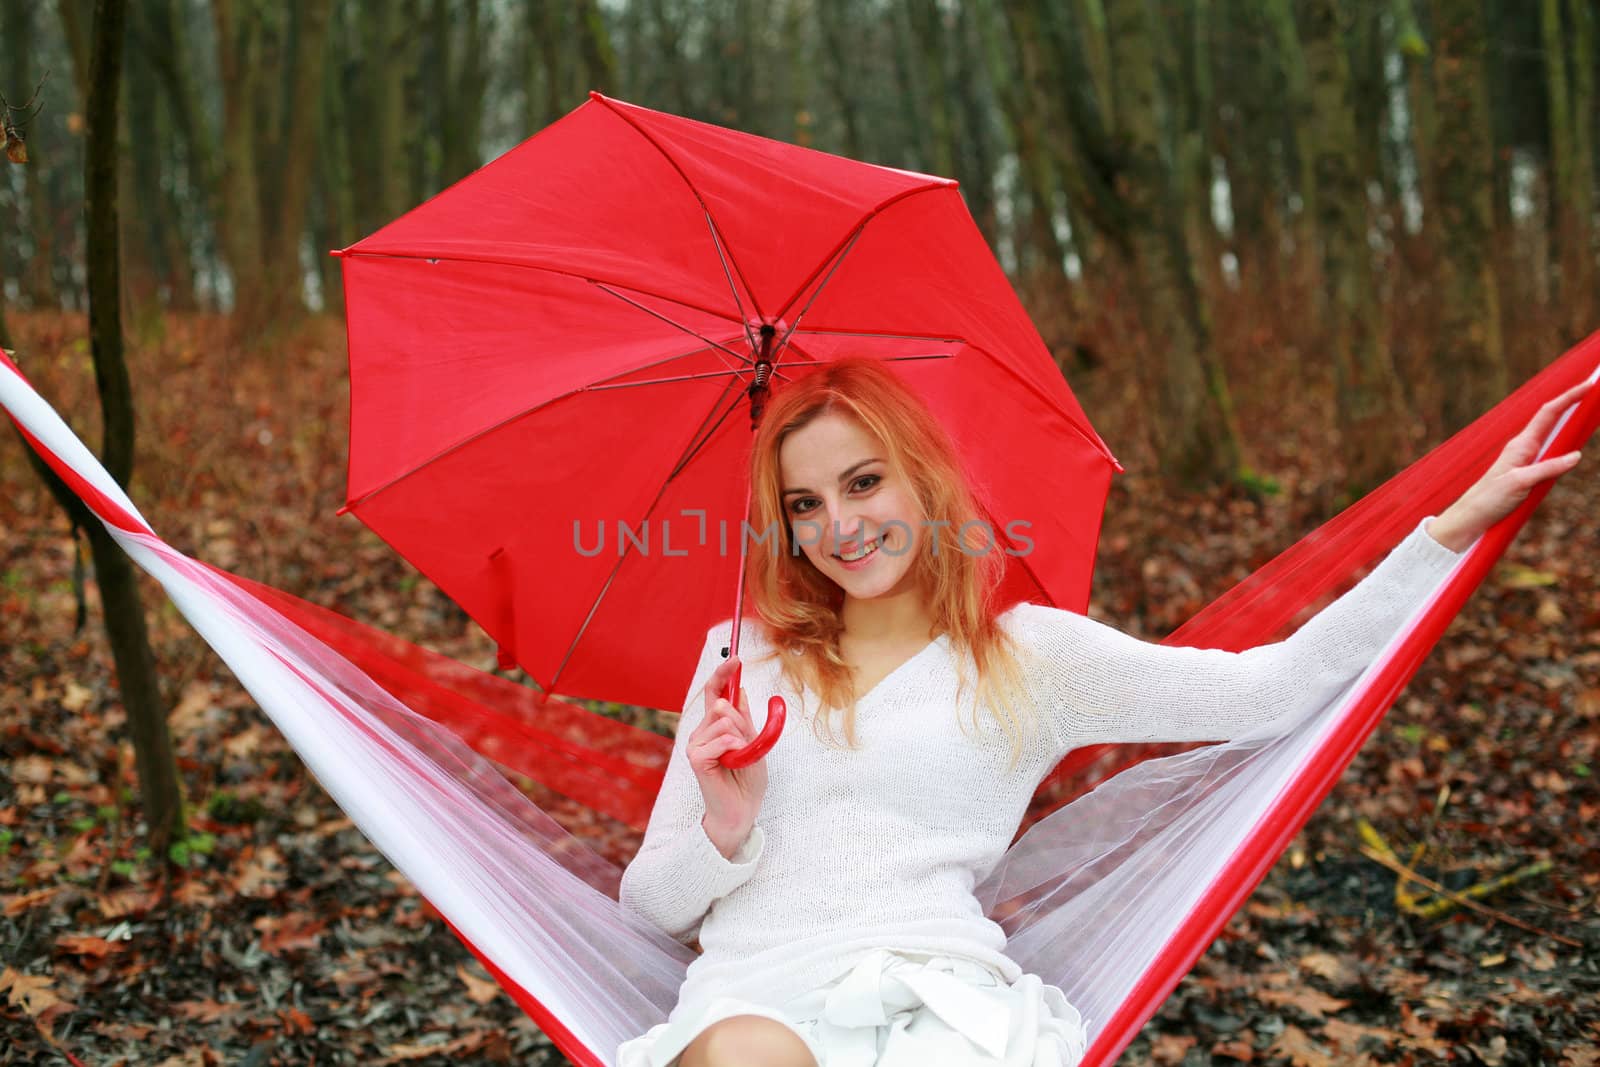 An image of happy girl with red umbrella